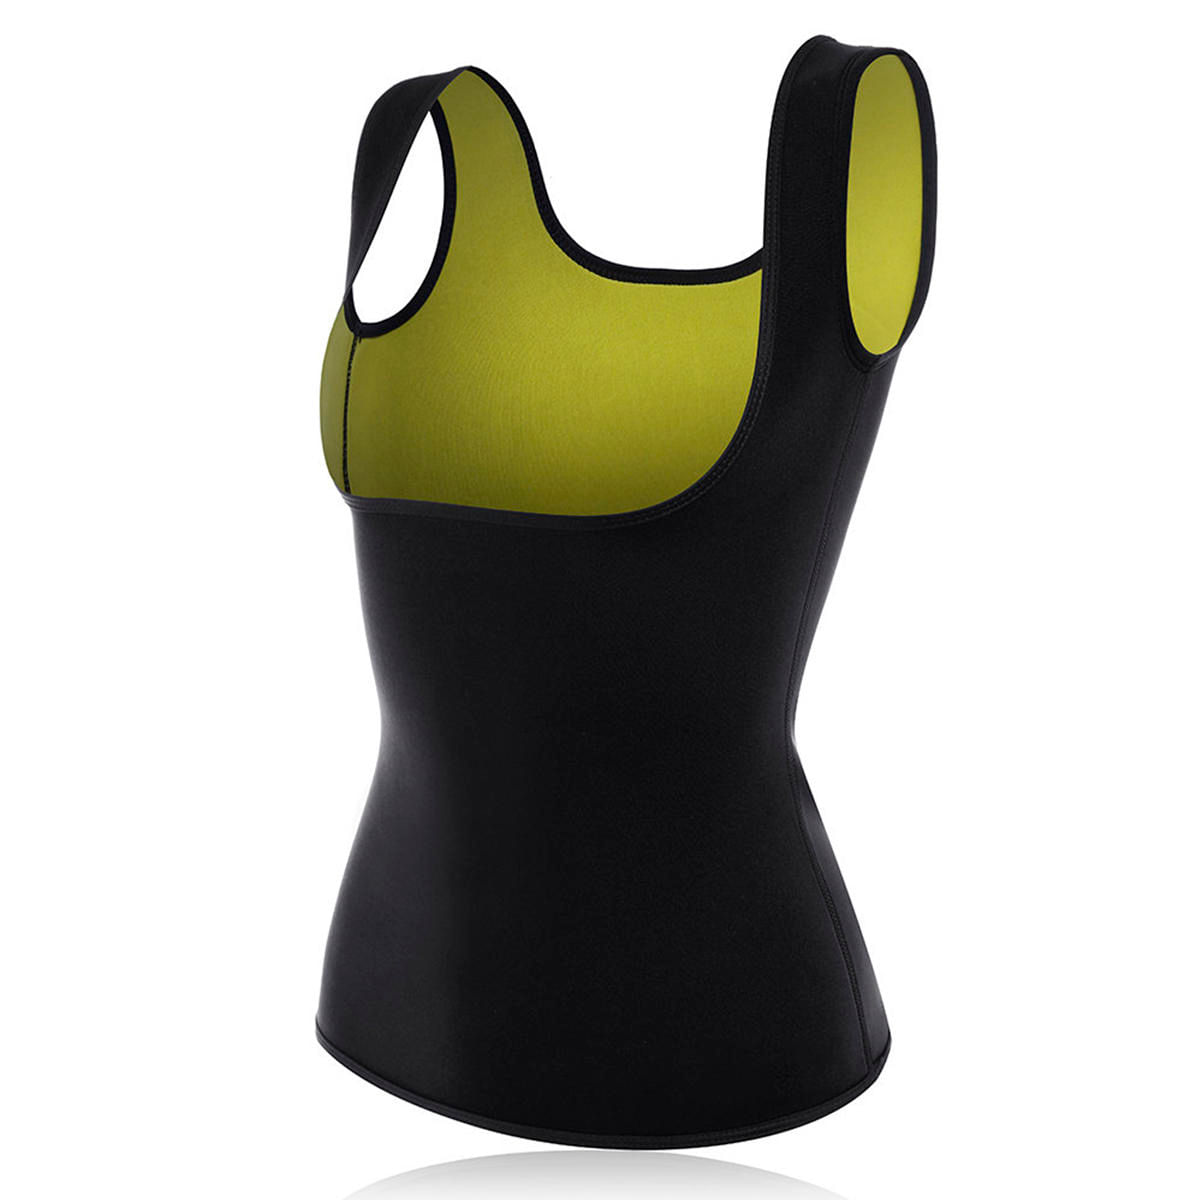 Chaleco Tubular Thermo Shapers - REDUCE MEDIDAS MUY FACILMENTE Sport Fitness - S